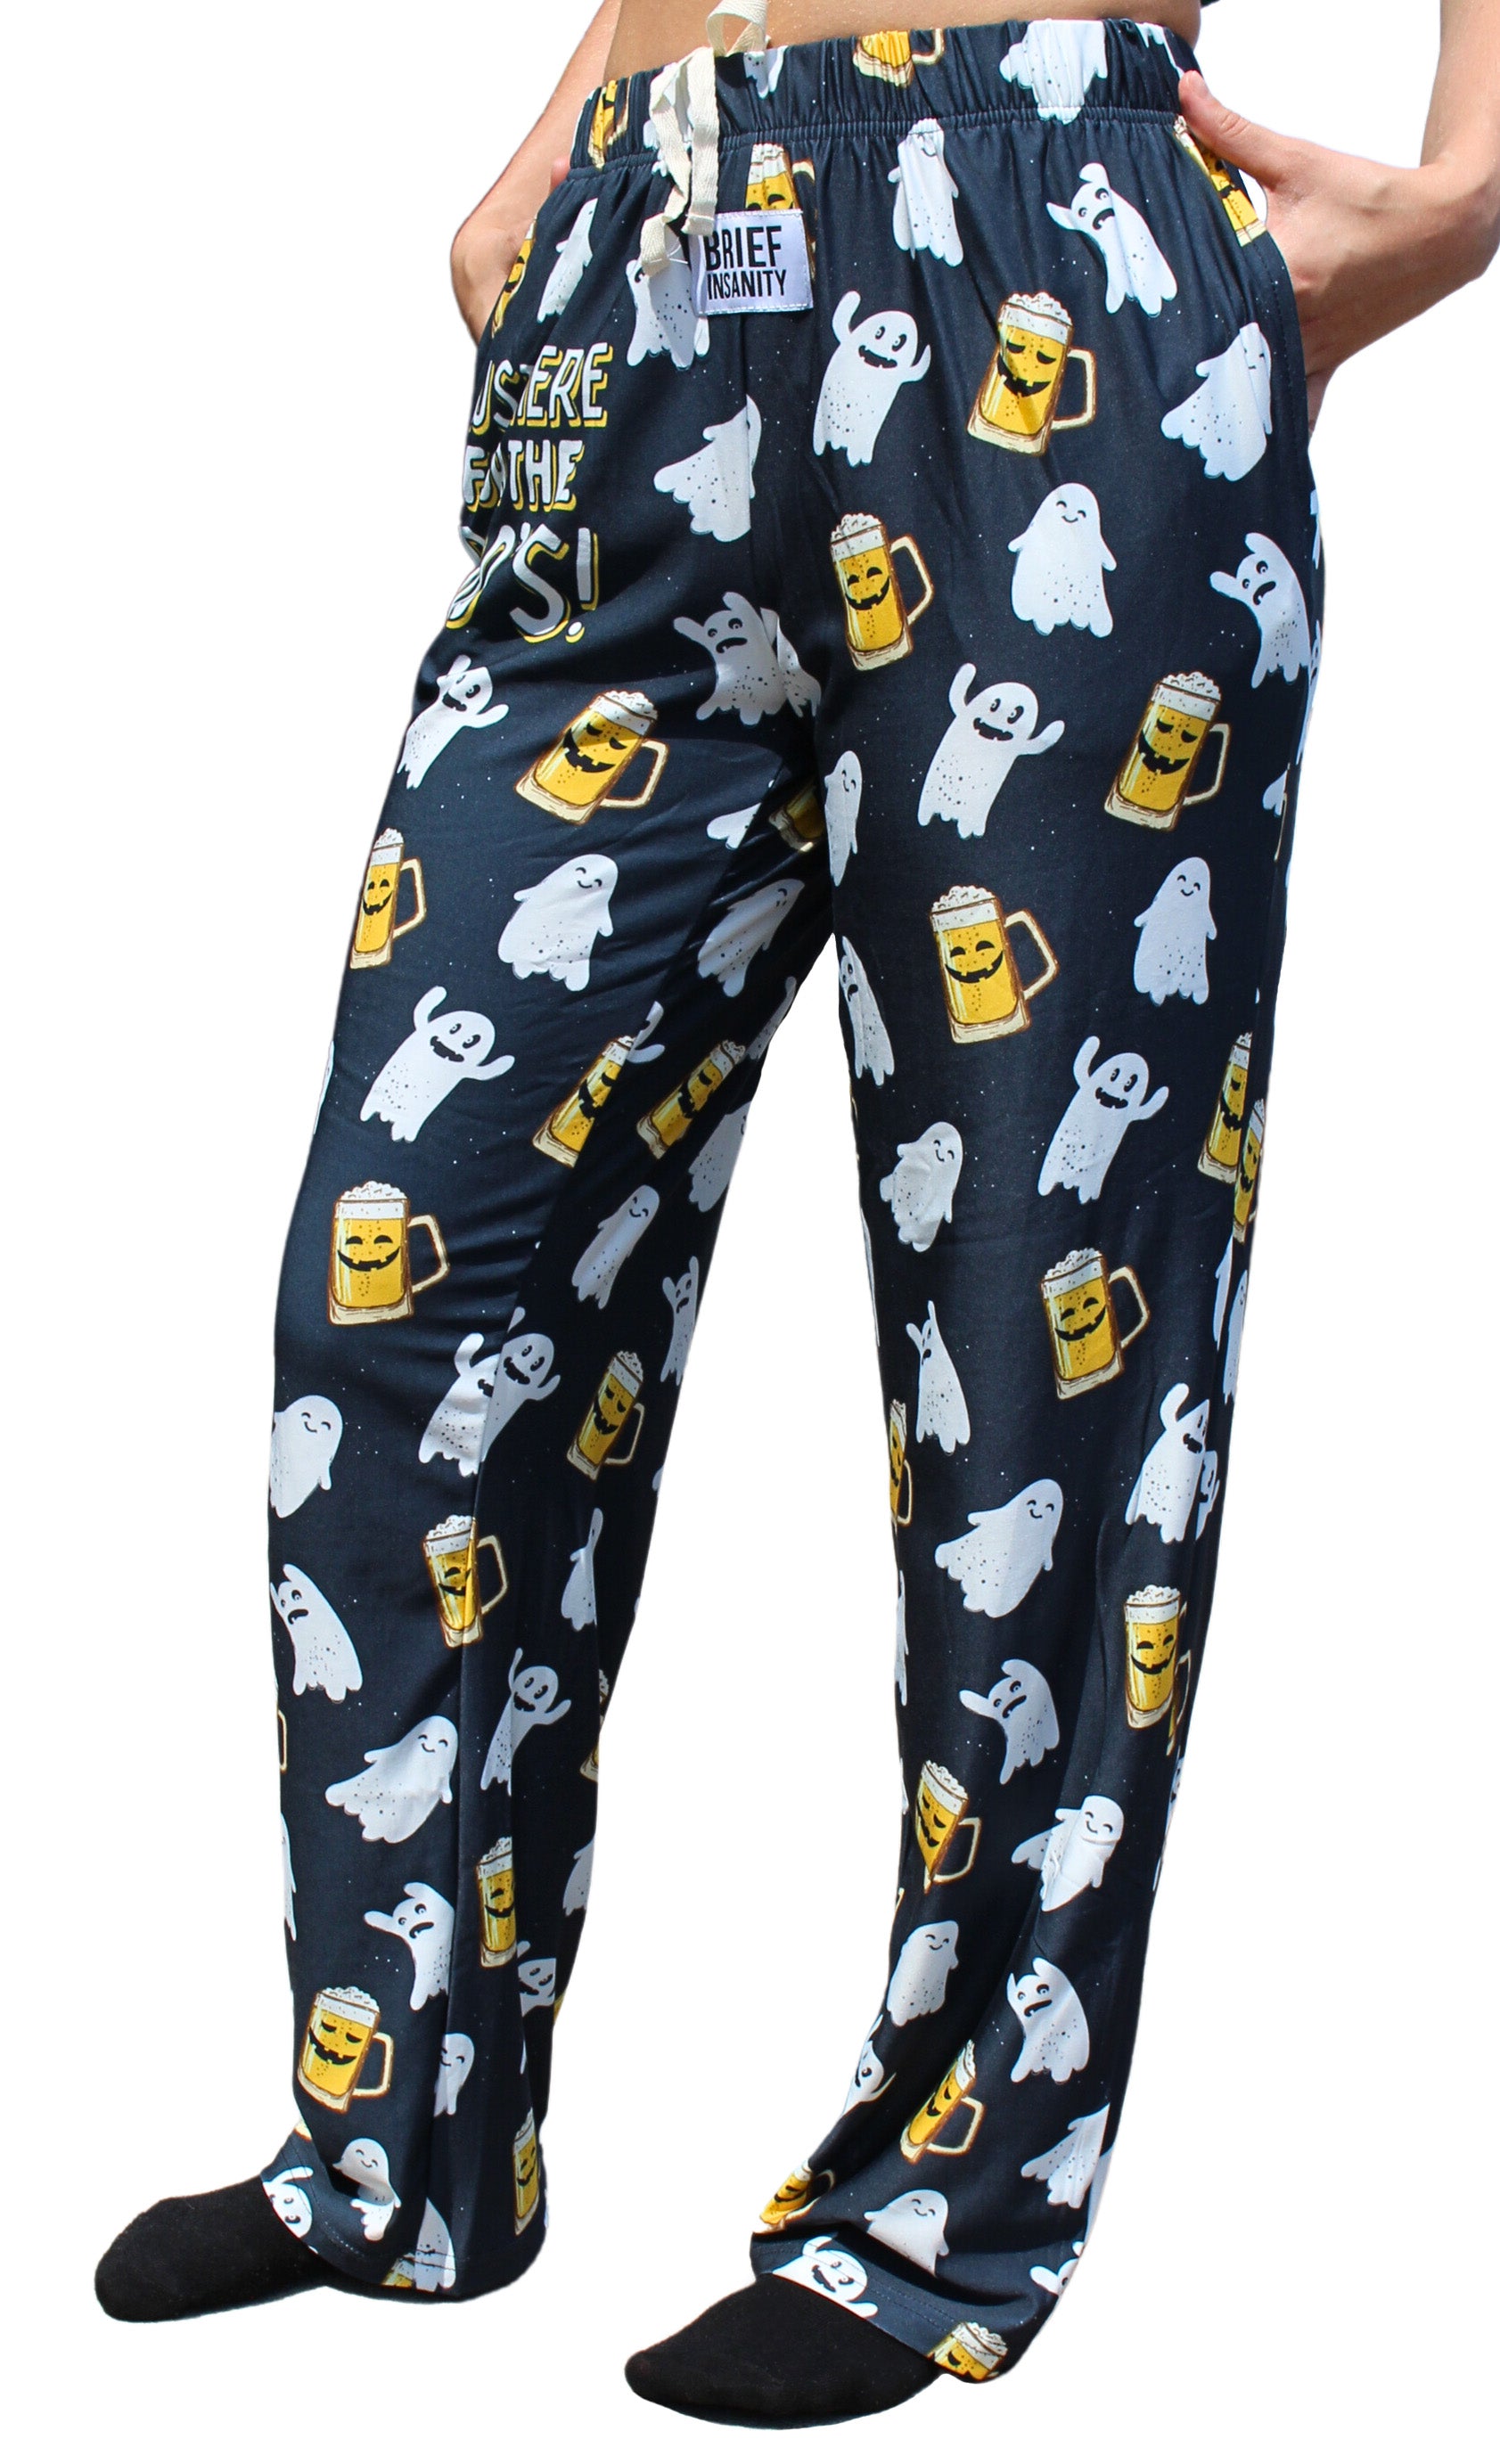 Just Here For the Boo's! Pajama Lounge Pants left side view on model (waist down)